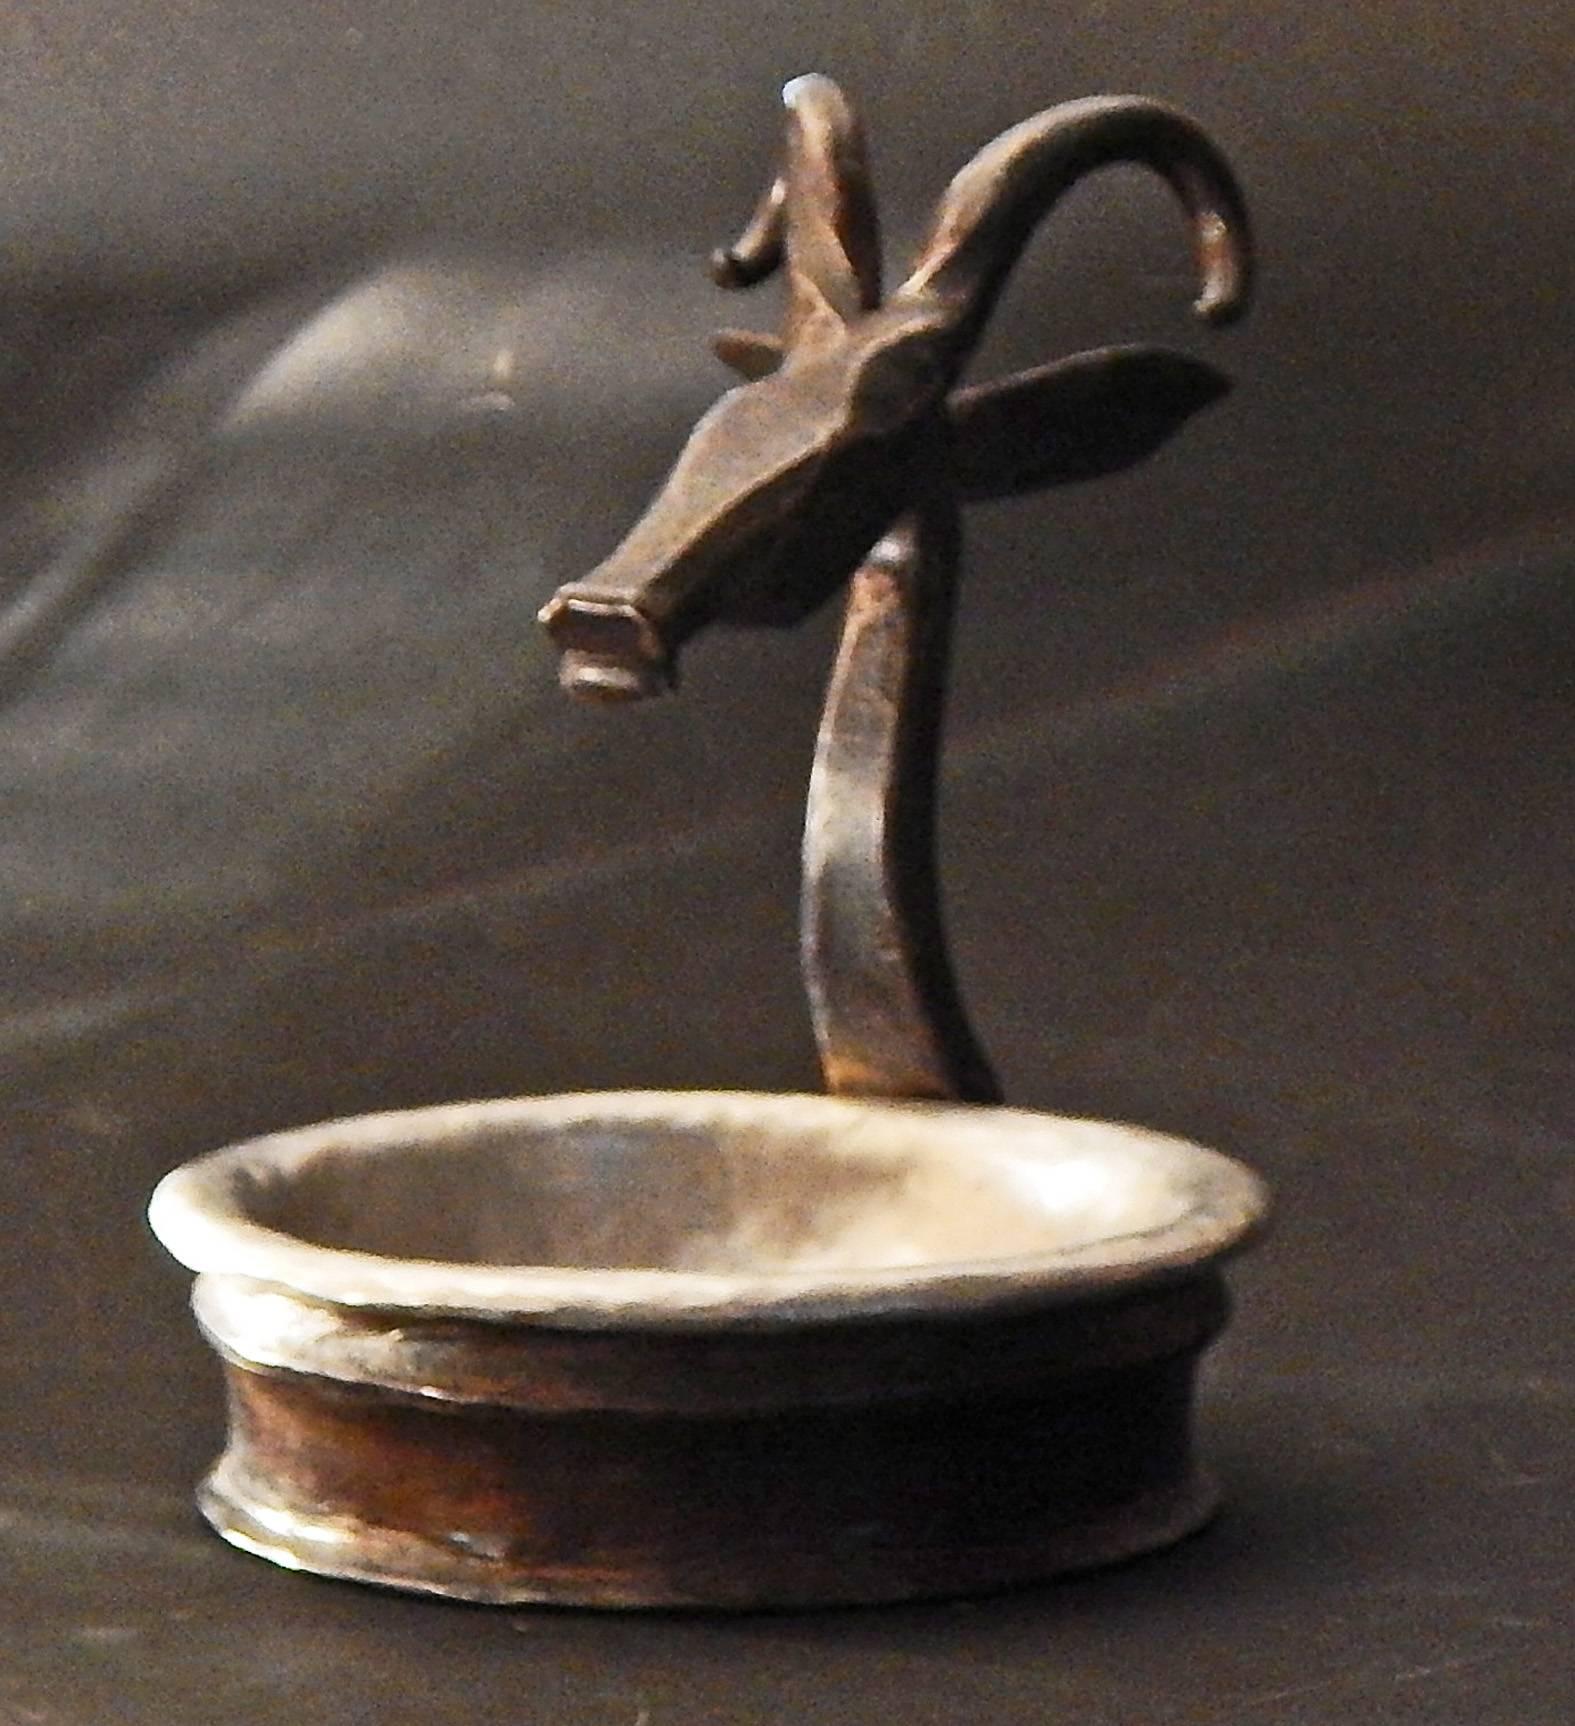 Superbly crafted in wrought iron and pewter, this lovely pin dish is surmounted by an antelope's head, stylized and simple, yet suffused with energy. Dating, no doubt, from the era when Oscar Bach and Samuel Yellin were at their height, in the 1920s